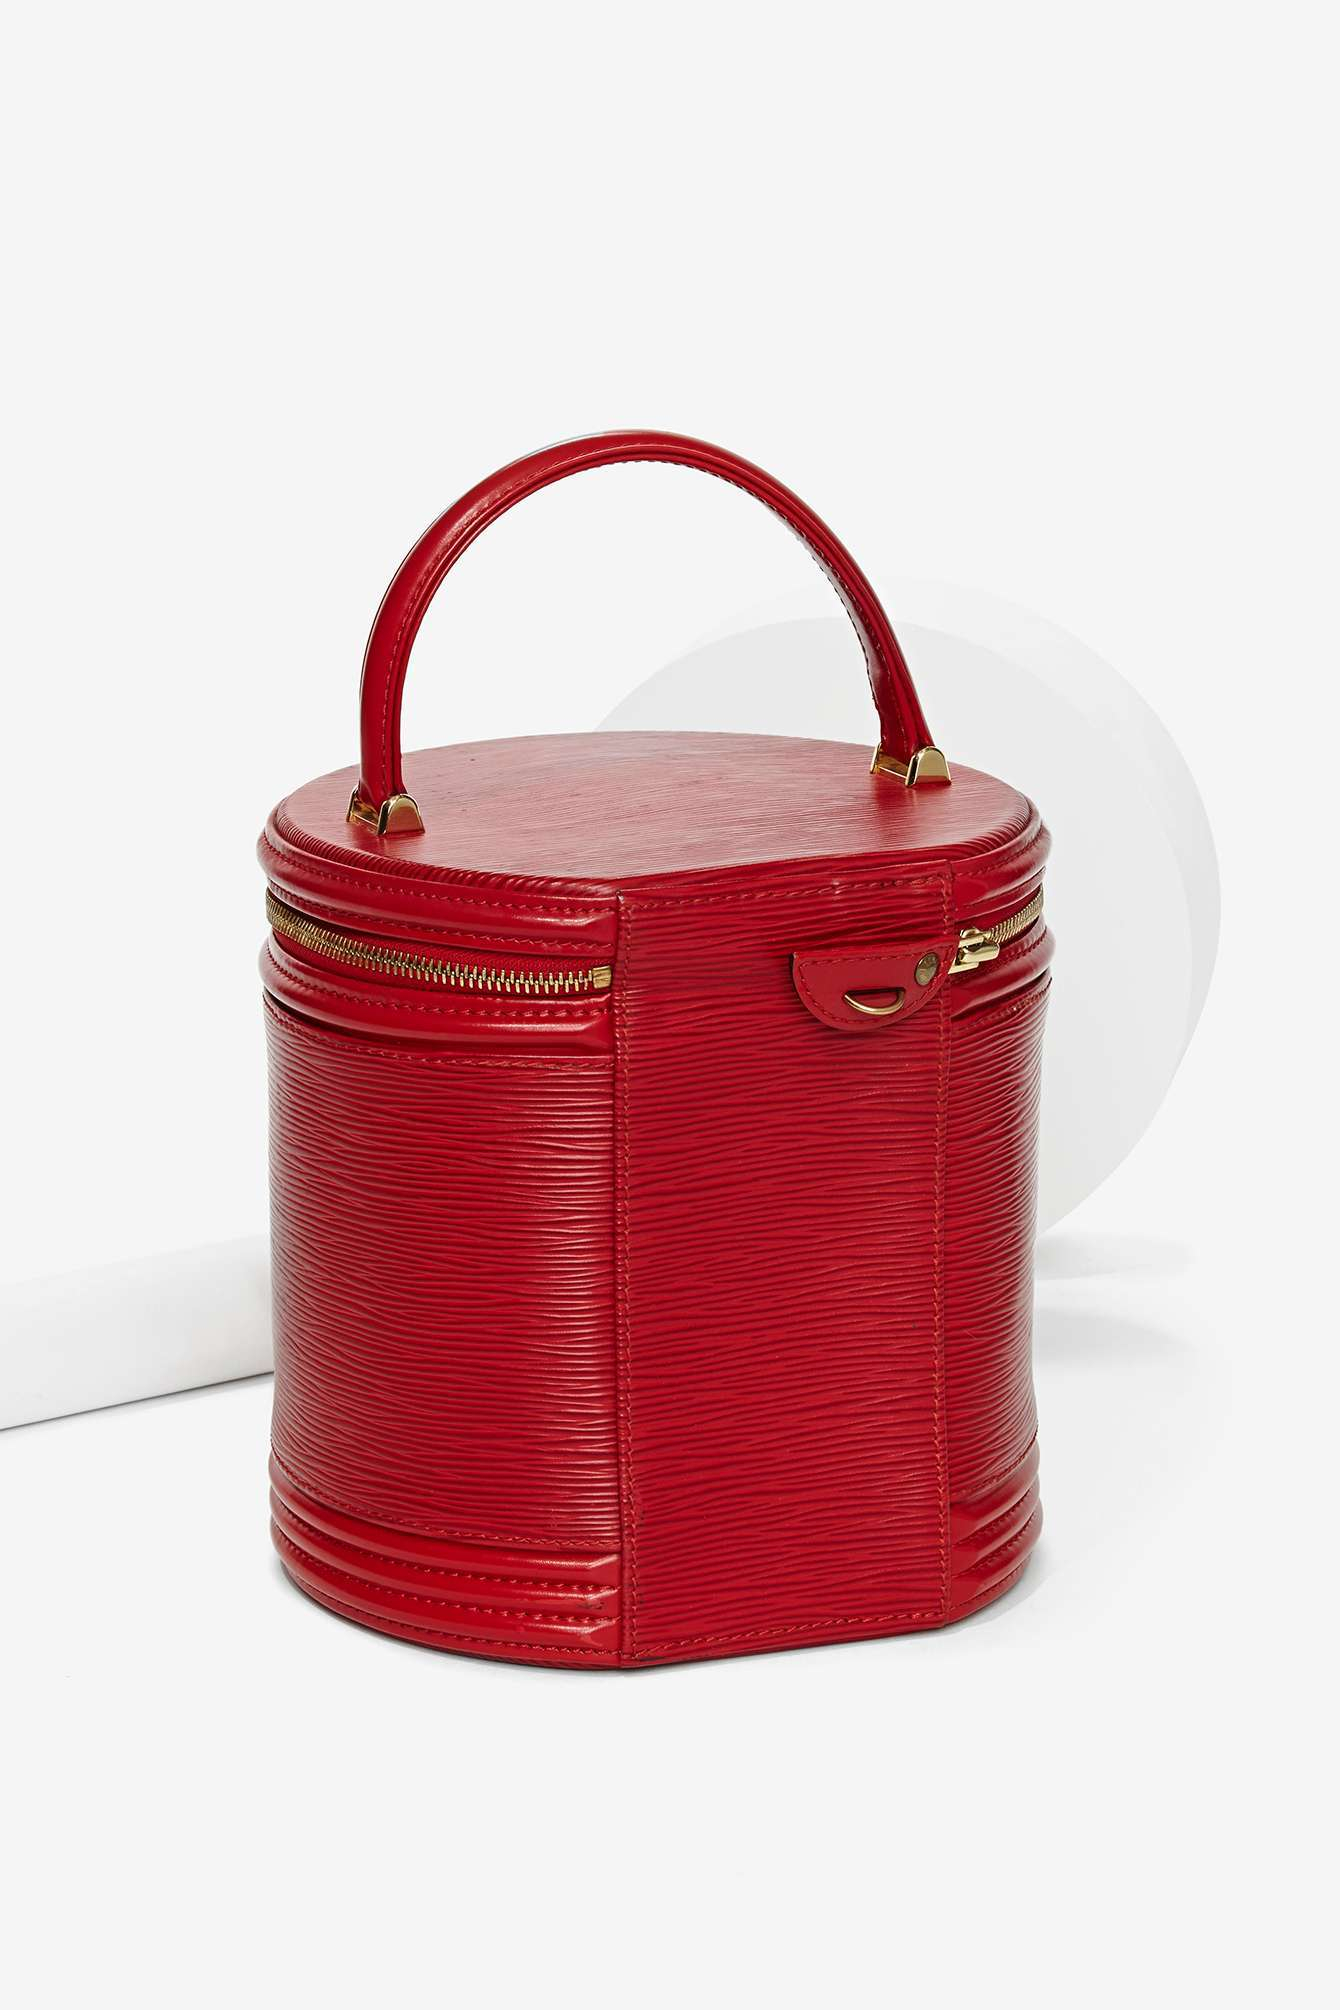 Nasty Gal Vintage Louis Vuitton Cannes Leather Vanity Case in Red - Lyst